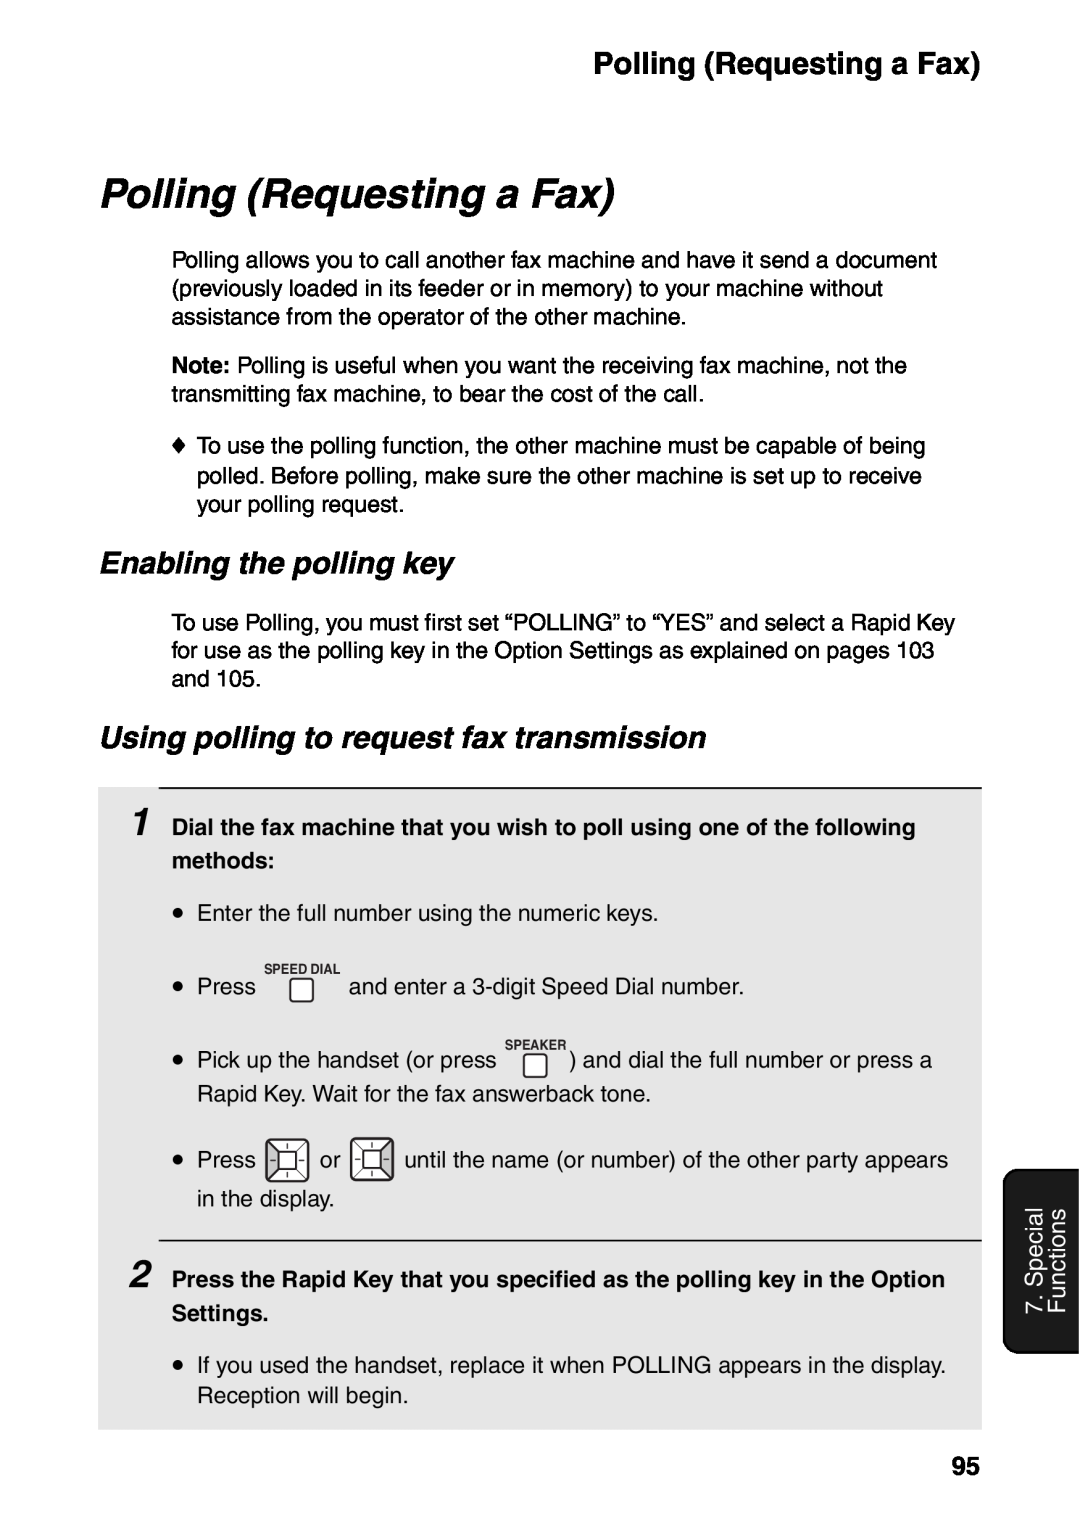 Sharp FO-IS115N Polling Requesting a Fax, Enabling the polling key, Using polling to request fax transmission 